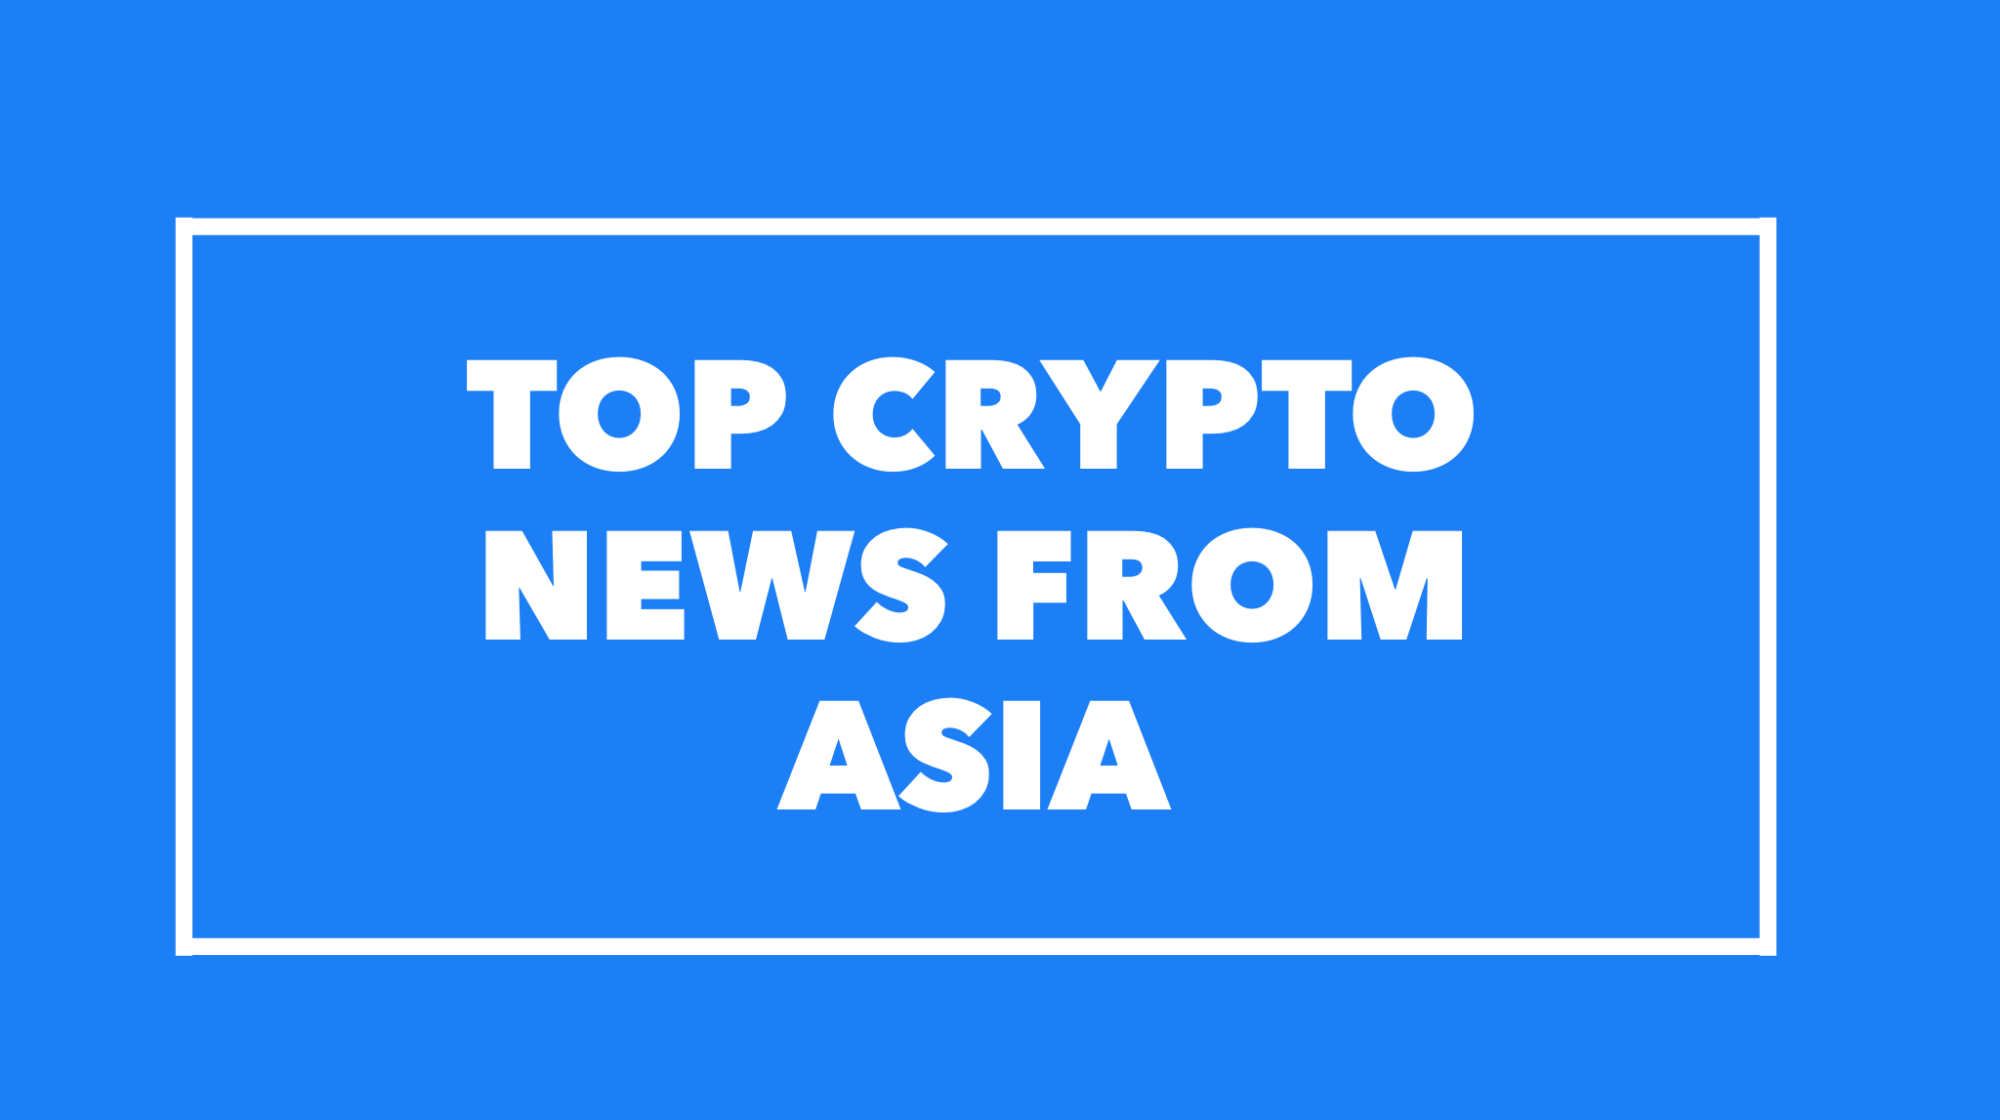 Asia Crypto News Roundup This Week- Jan 5th